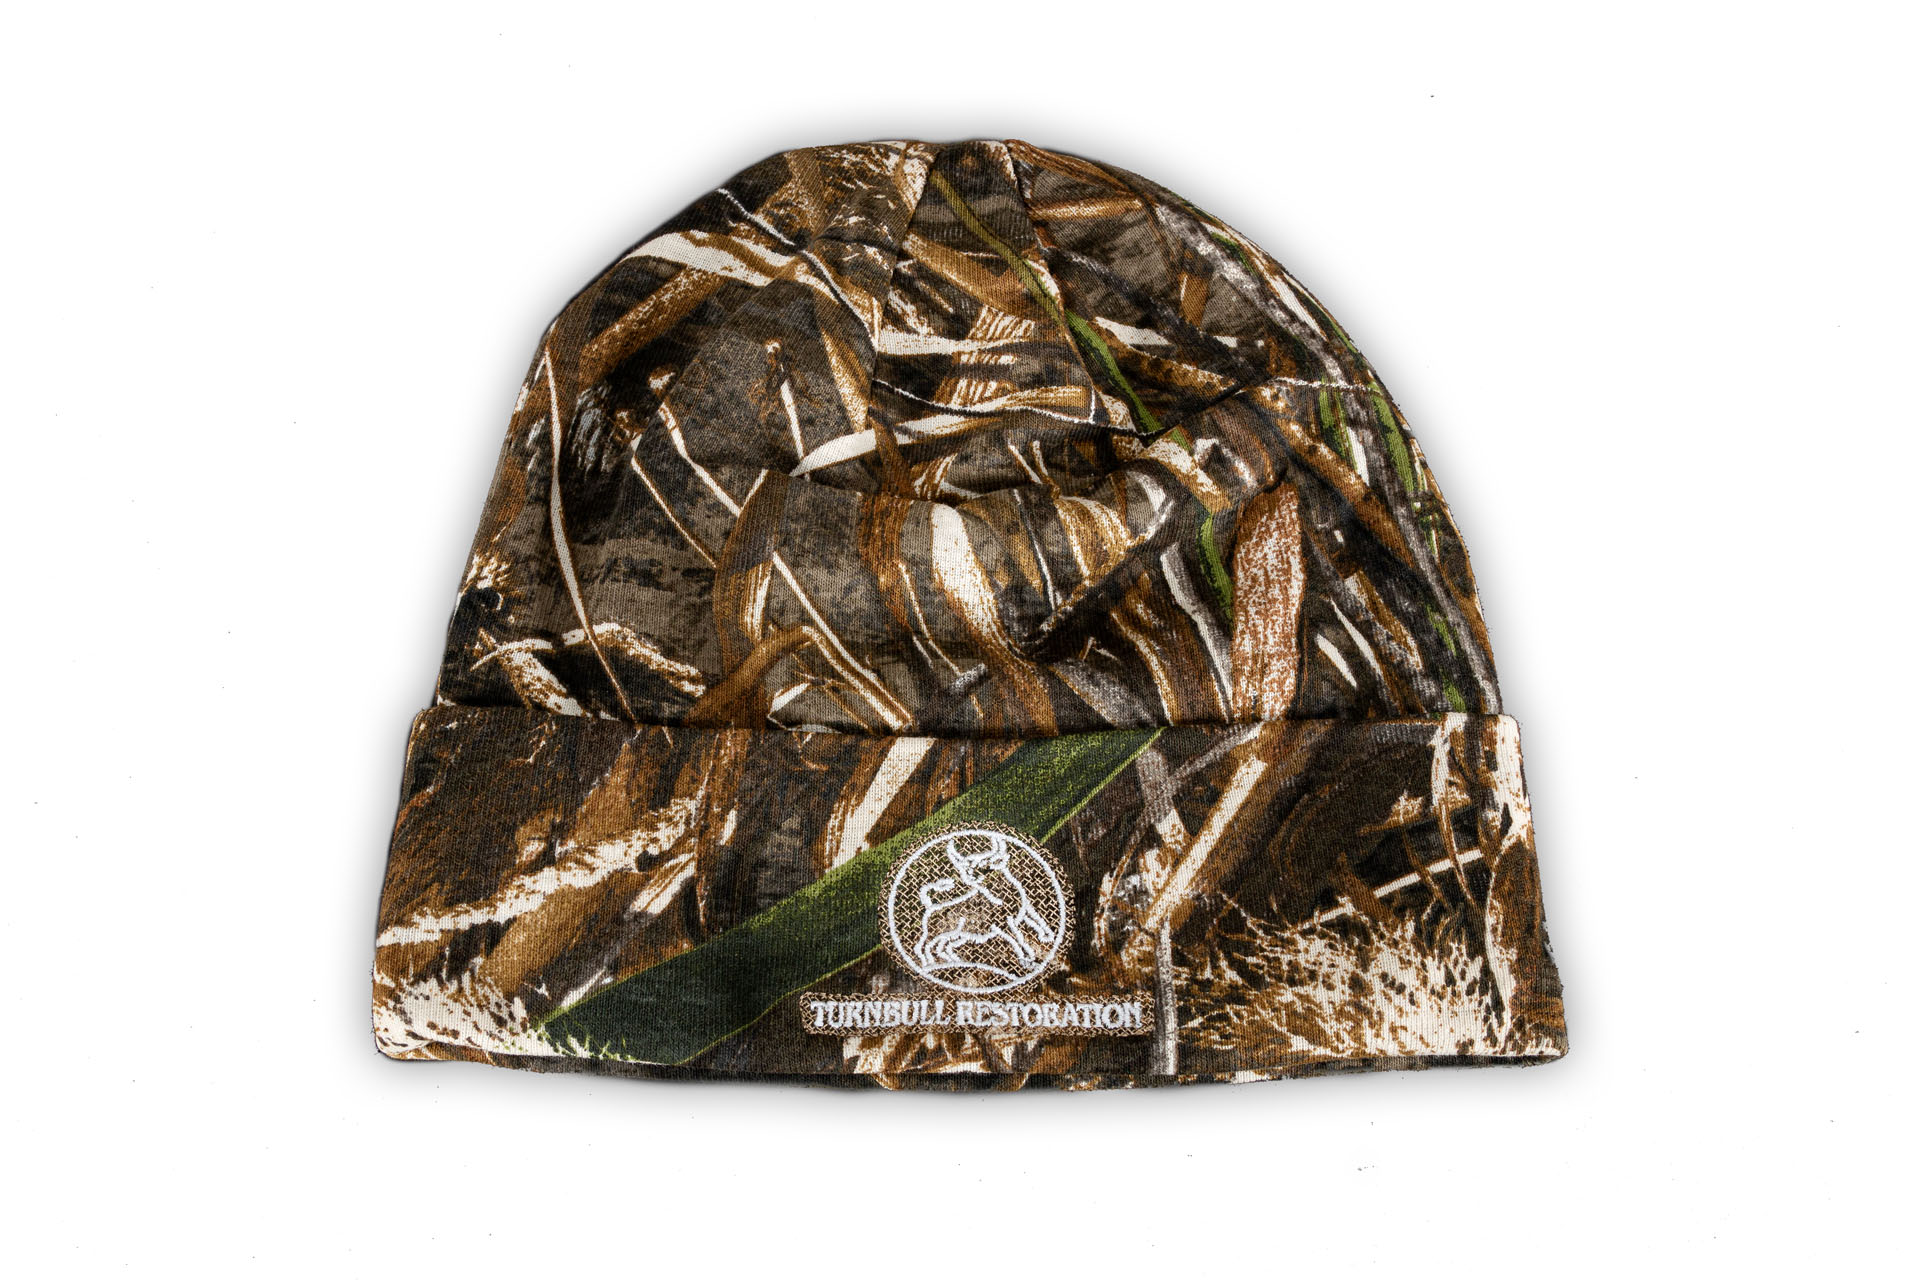 Photo of a Turnbull Restoration knit hat, printed in Realtree Max-5 camo pattern